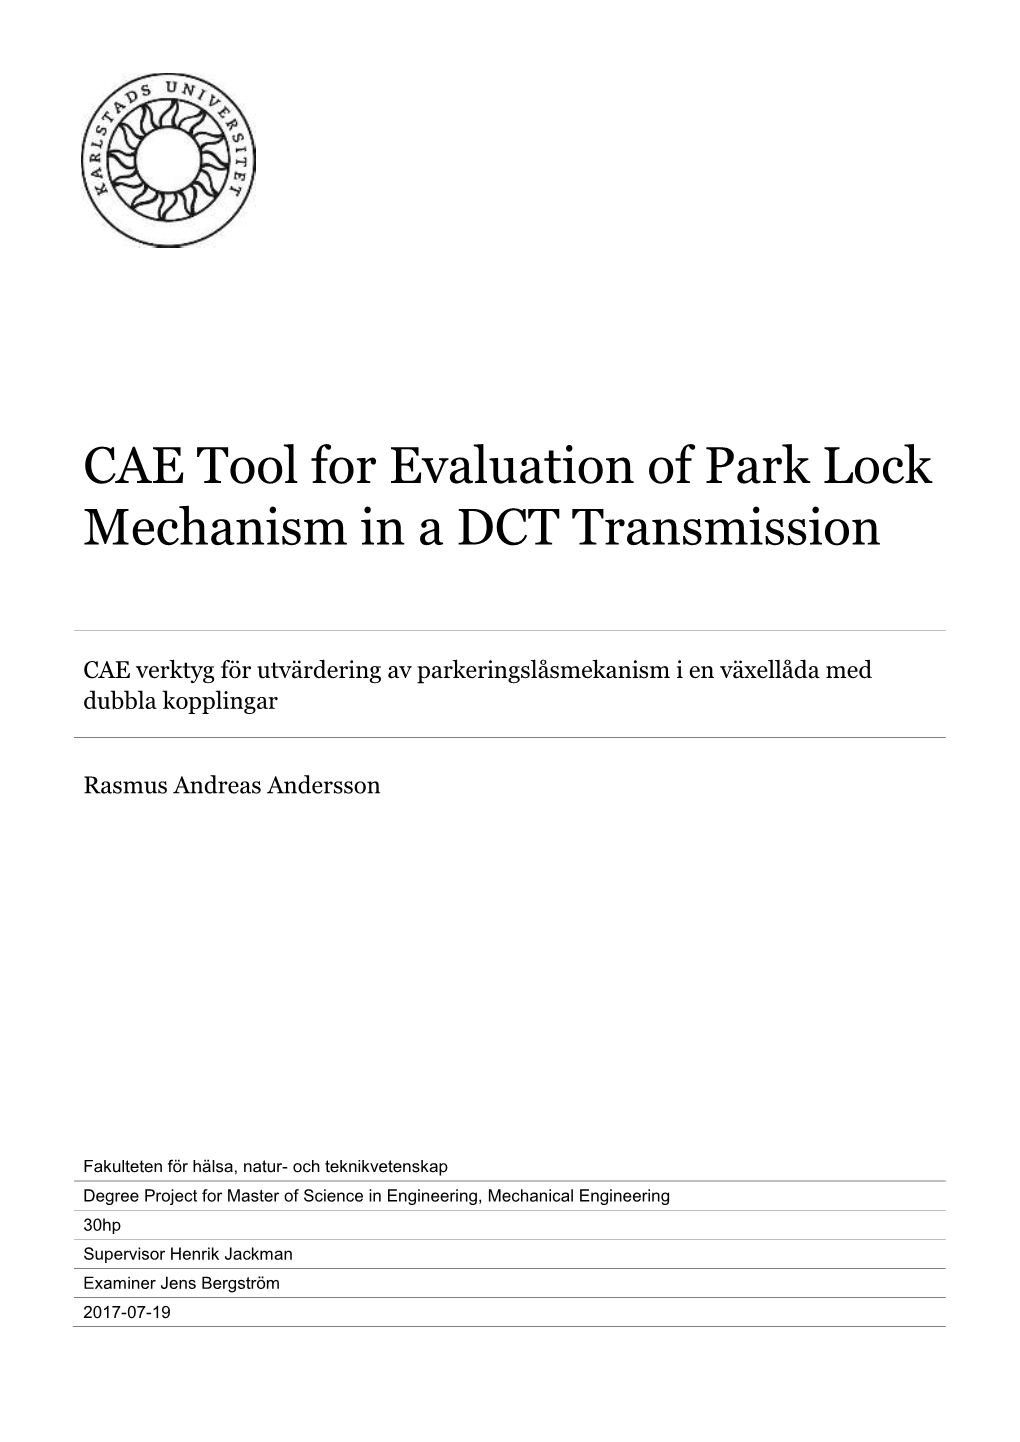 CAE Tool for Evaluation of Park Lock Mechanism in a DCT Transmission